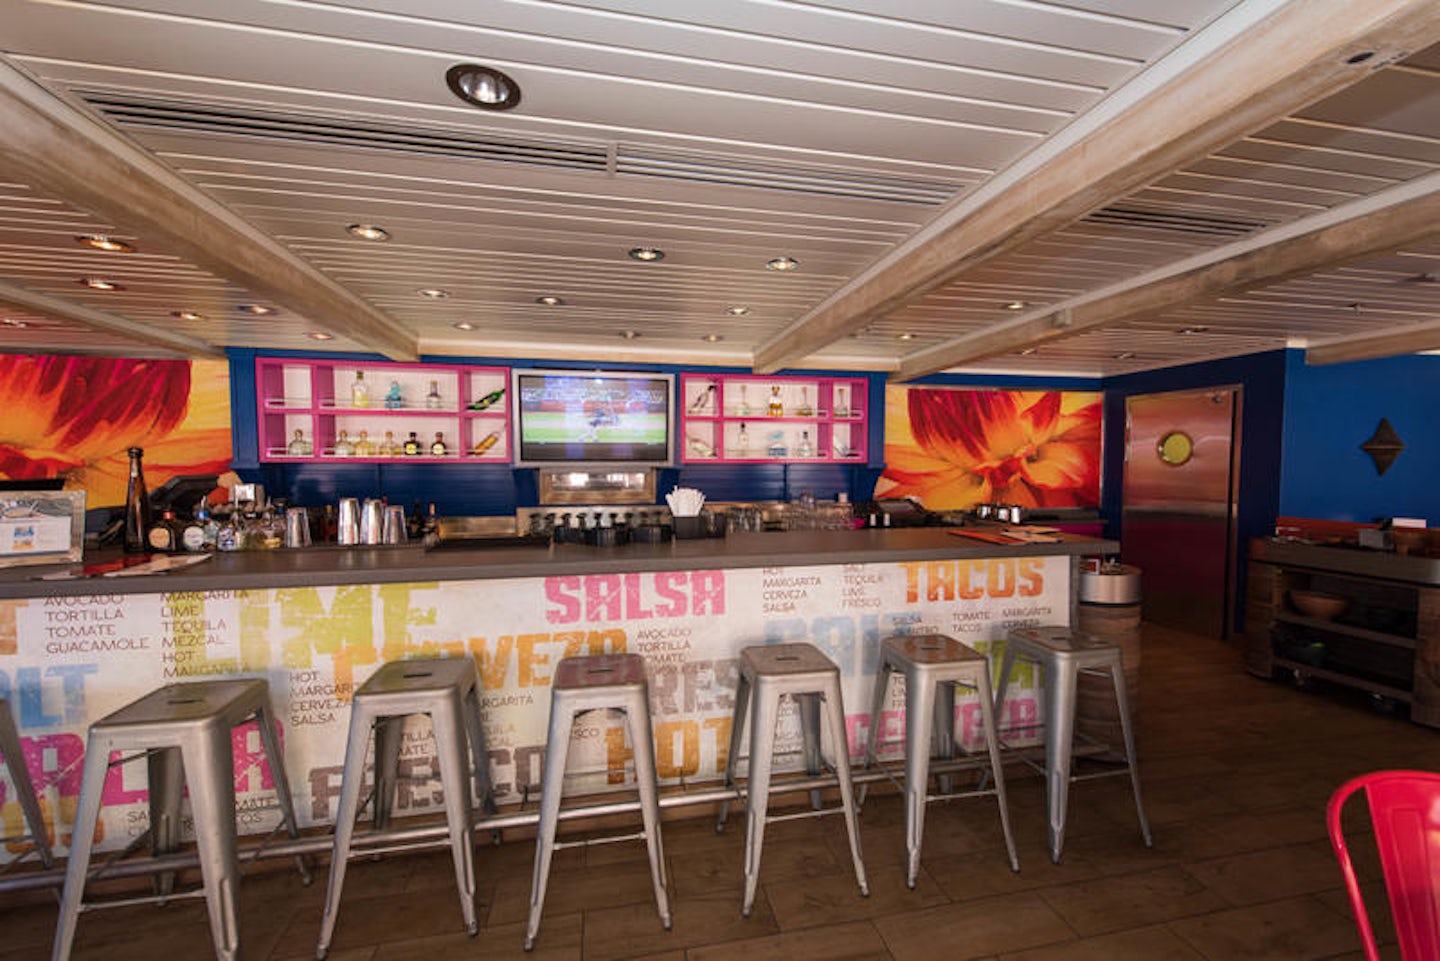 Sabor Taqueria & Tequila Bar on Oasis of the Seas